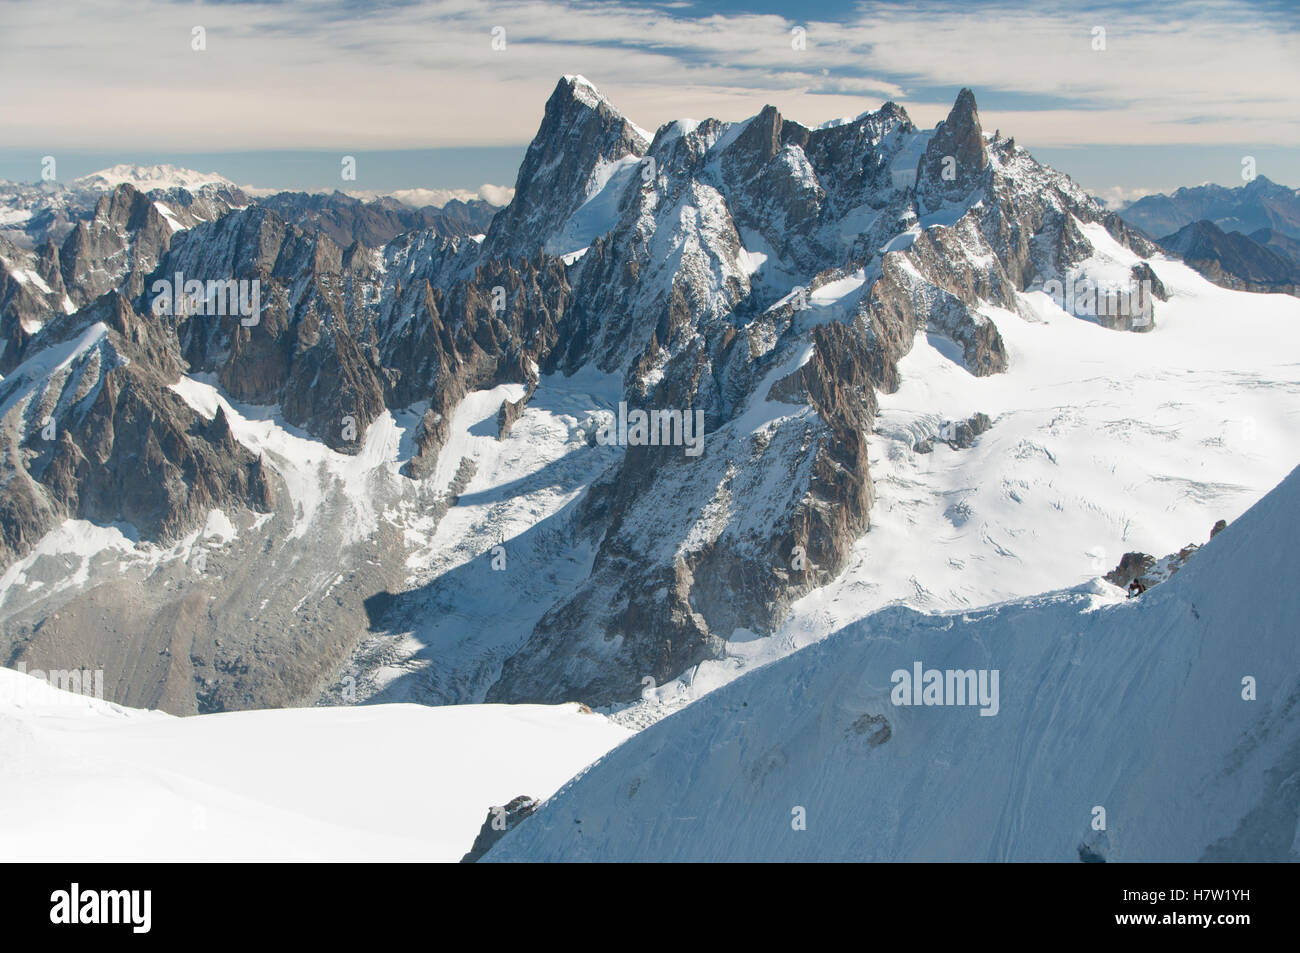 Grandes Jorasses of the Mont Blanc massif, as viewed from the Aiguille du Midi, Chamonix-Mont-Blanc, France Stock Photo